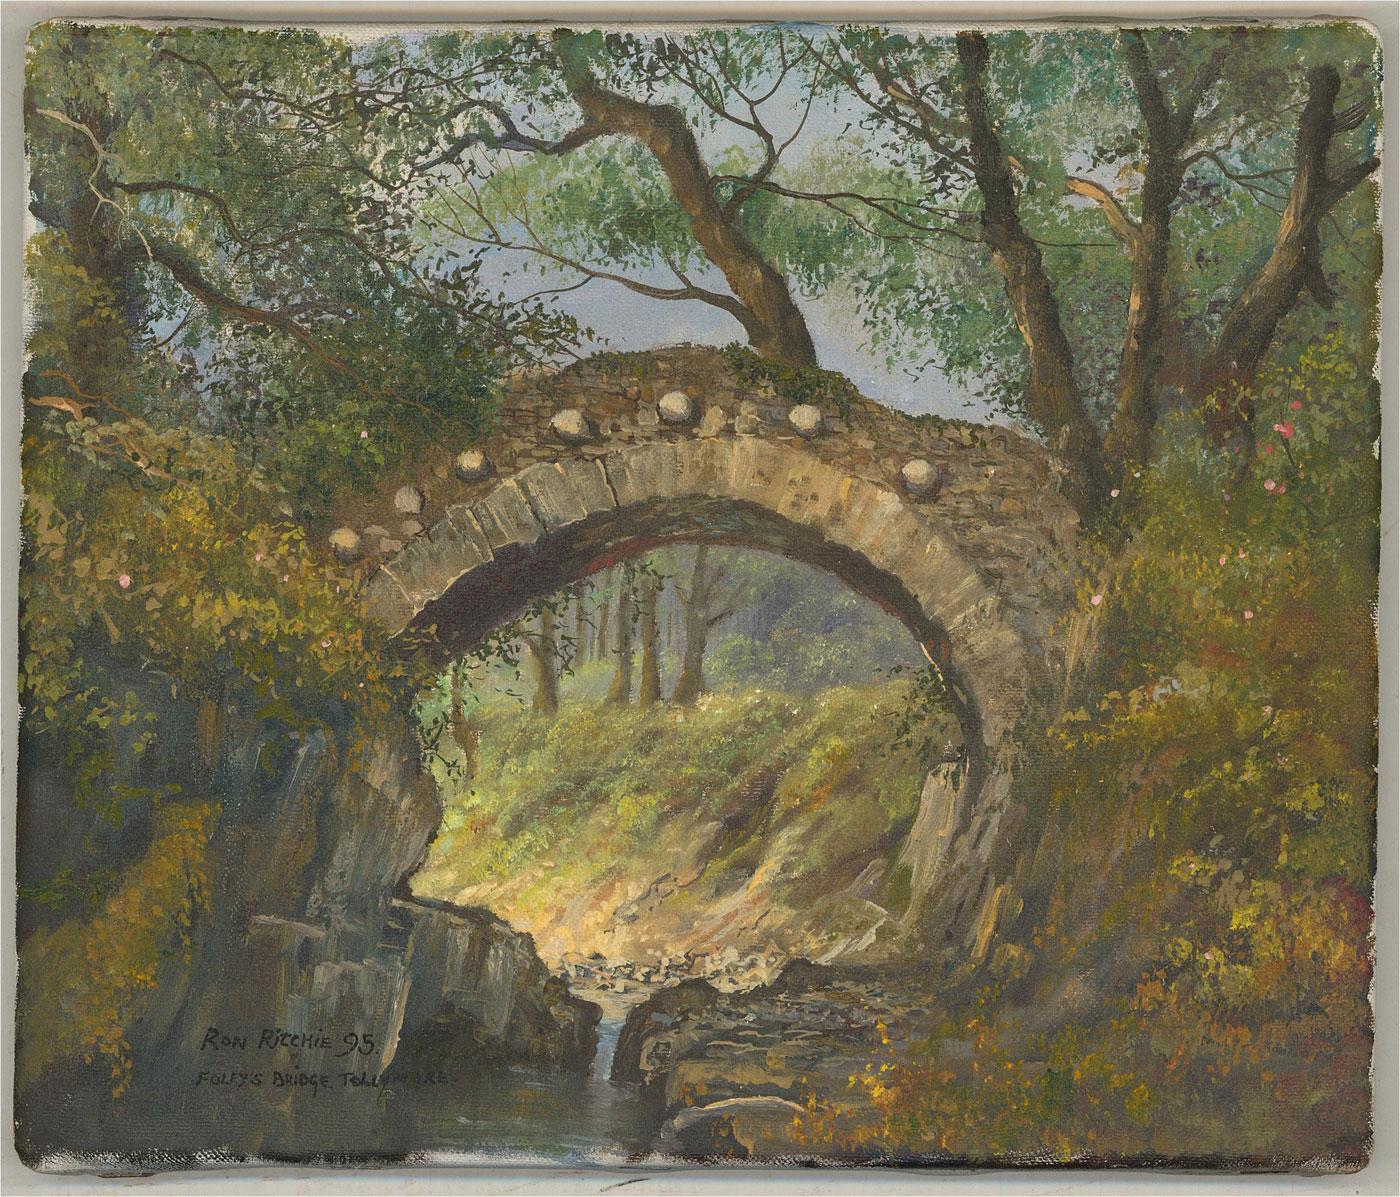 A view from the Shimna River of Foley's Bridge in Tollymore Forest Park, Northern Ireland. The bridge was built in 1787. Signed, dated, and inscribed with the location to the lower-left edge. On canvas on stretchers.
